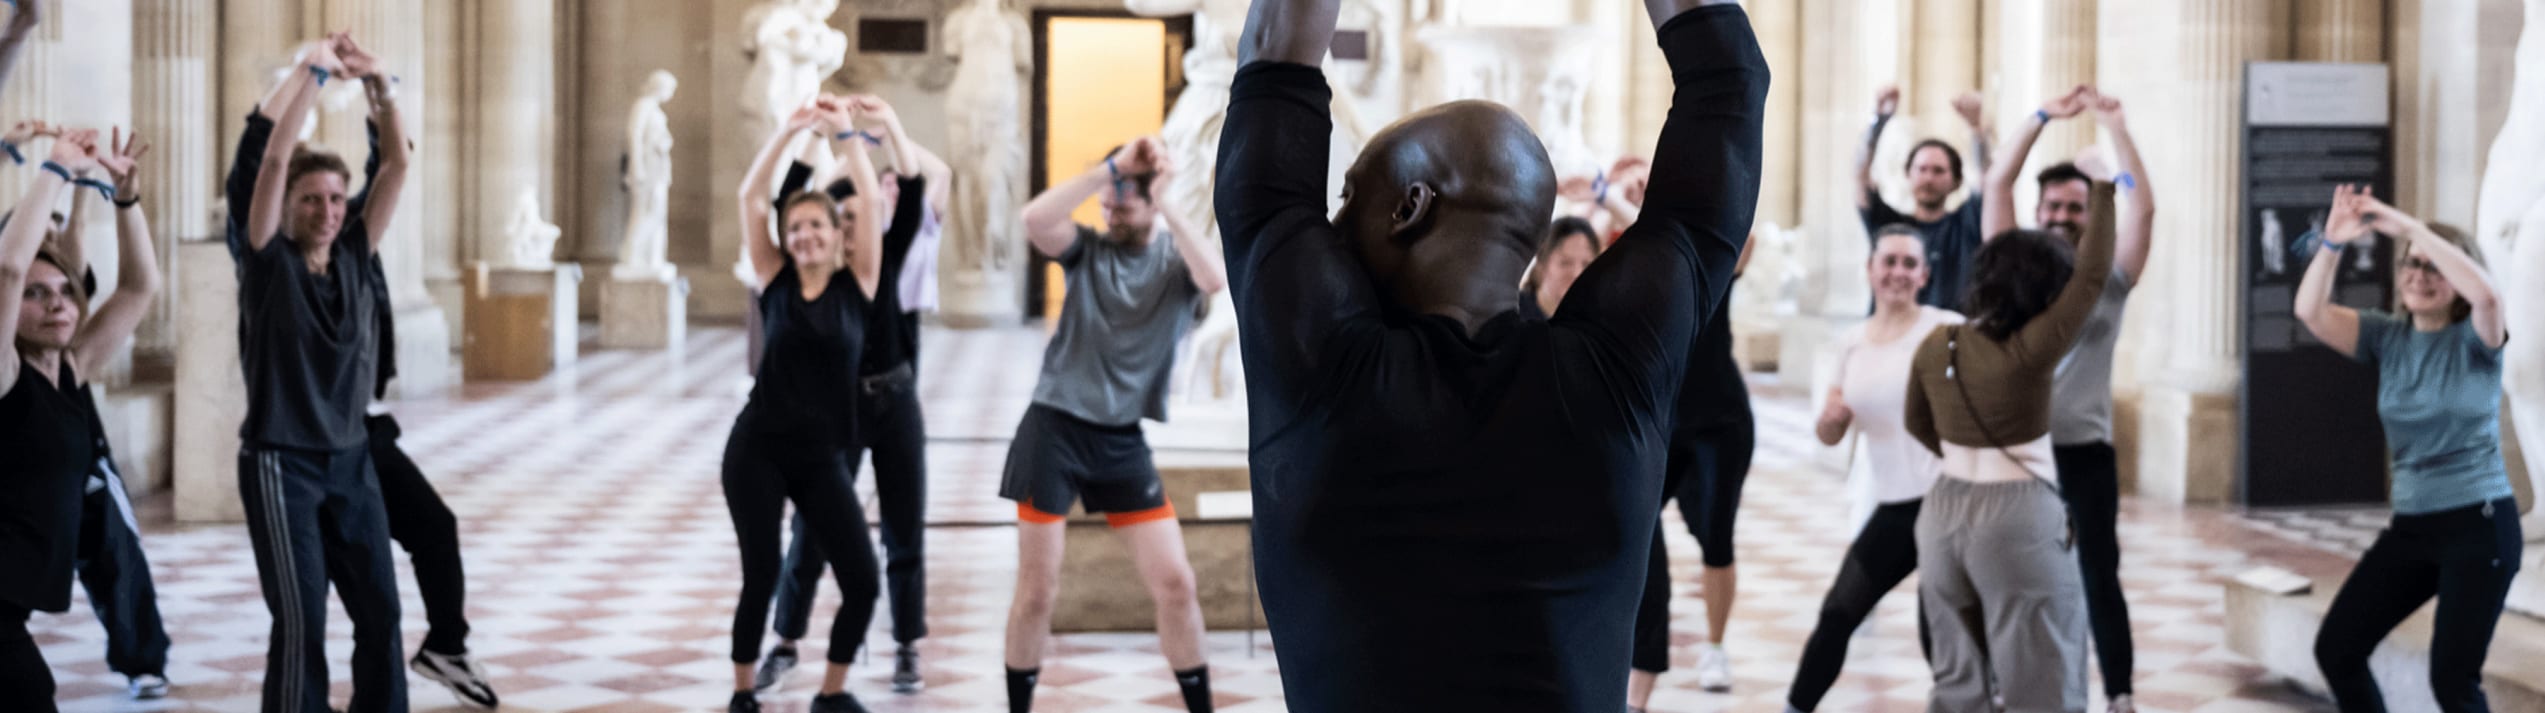 Read more about Dancing at the Louvre like Beyoncé and Jay-Z